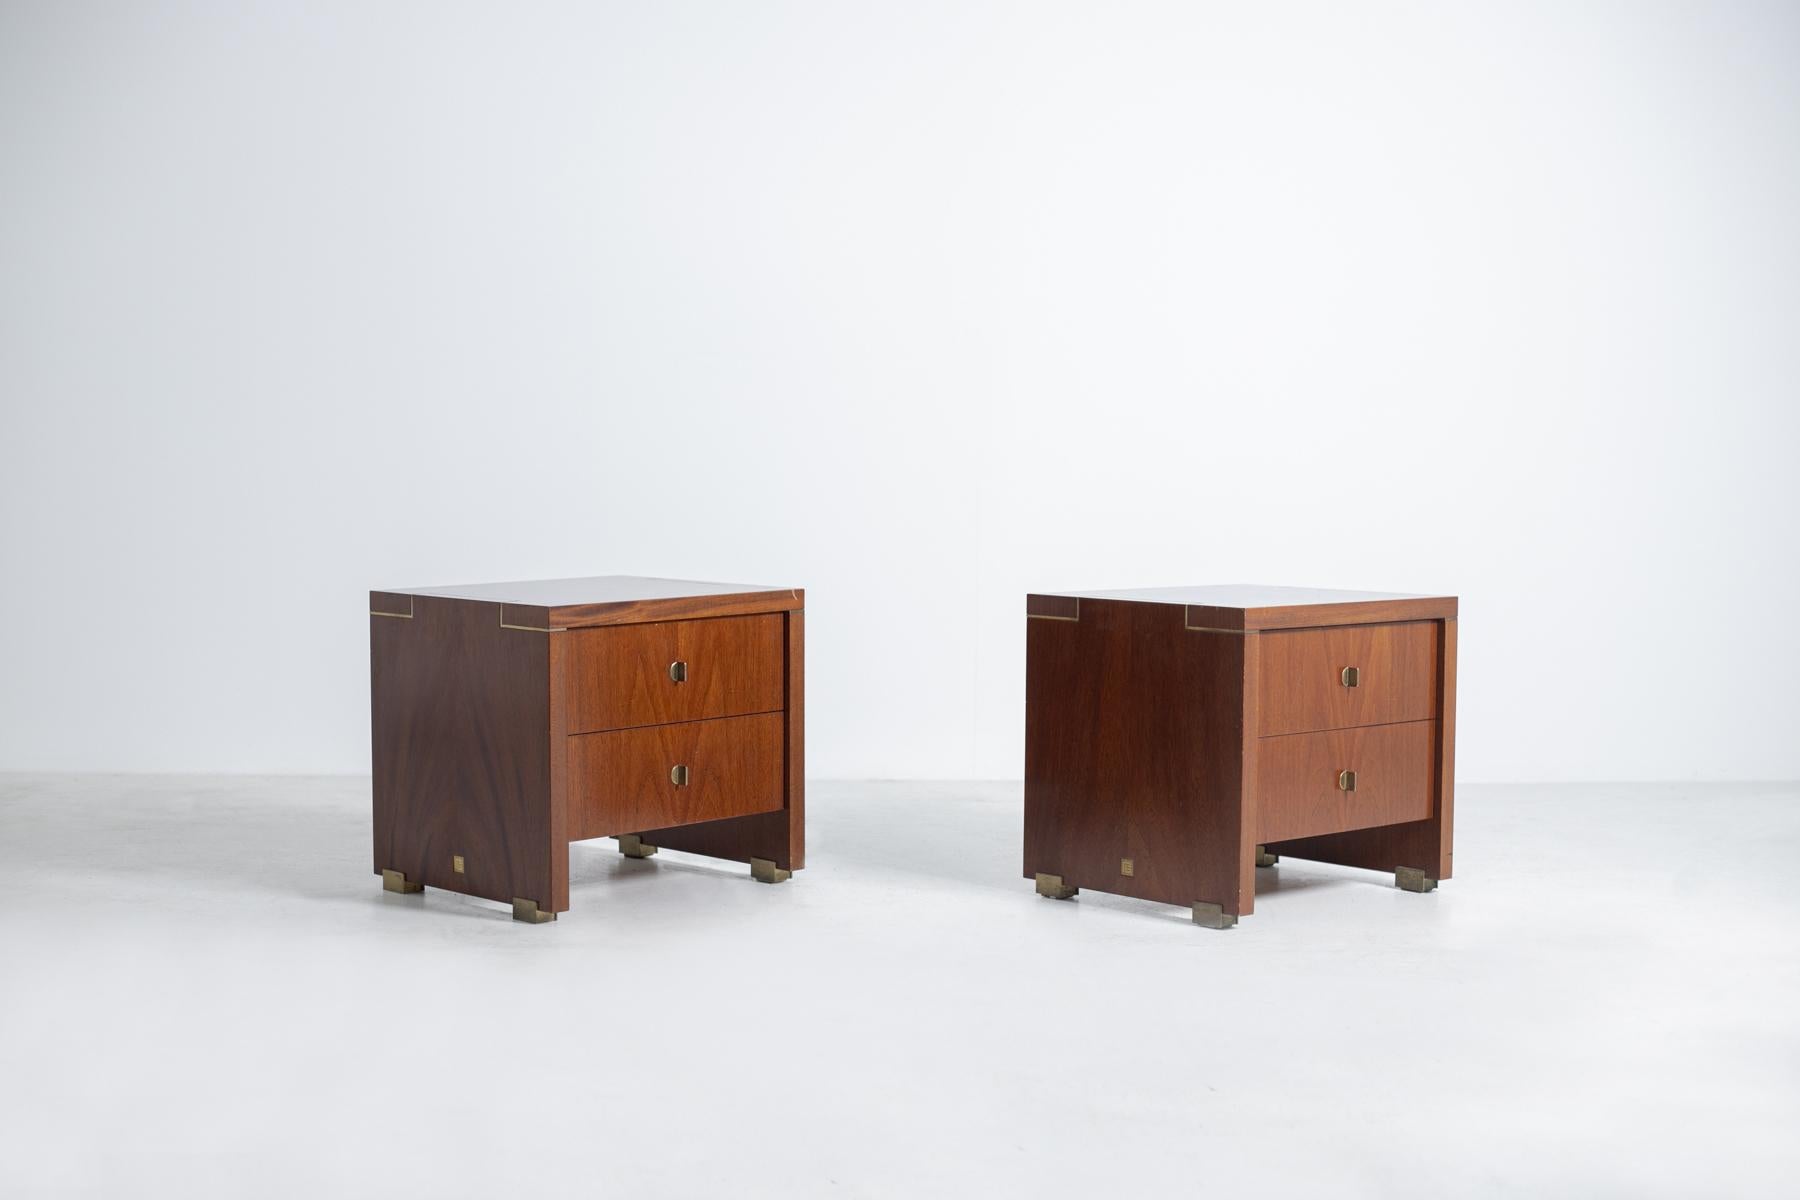 Pair of Classic and elegant original French bedside tables by Pierre Balmain from the 1980s.
The nightstands are part of the 